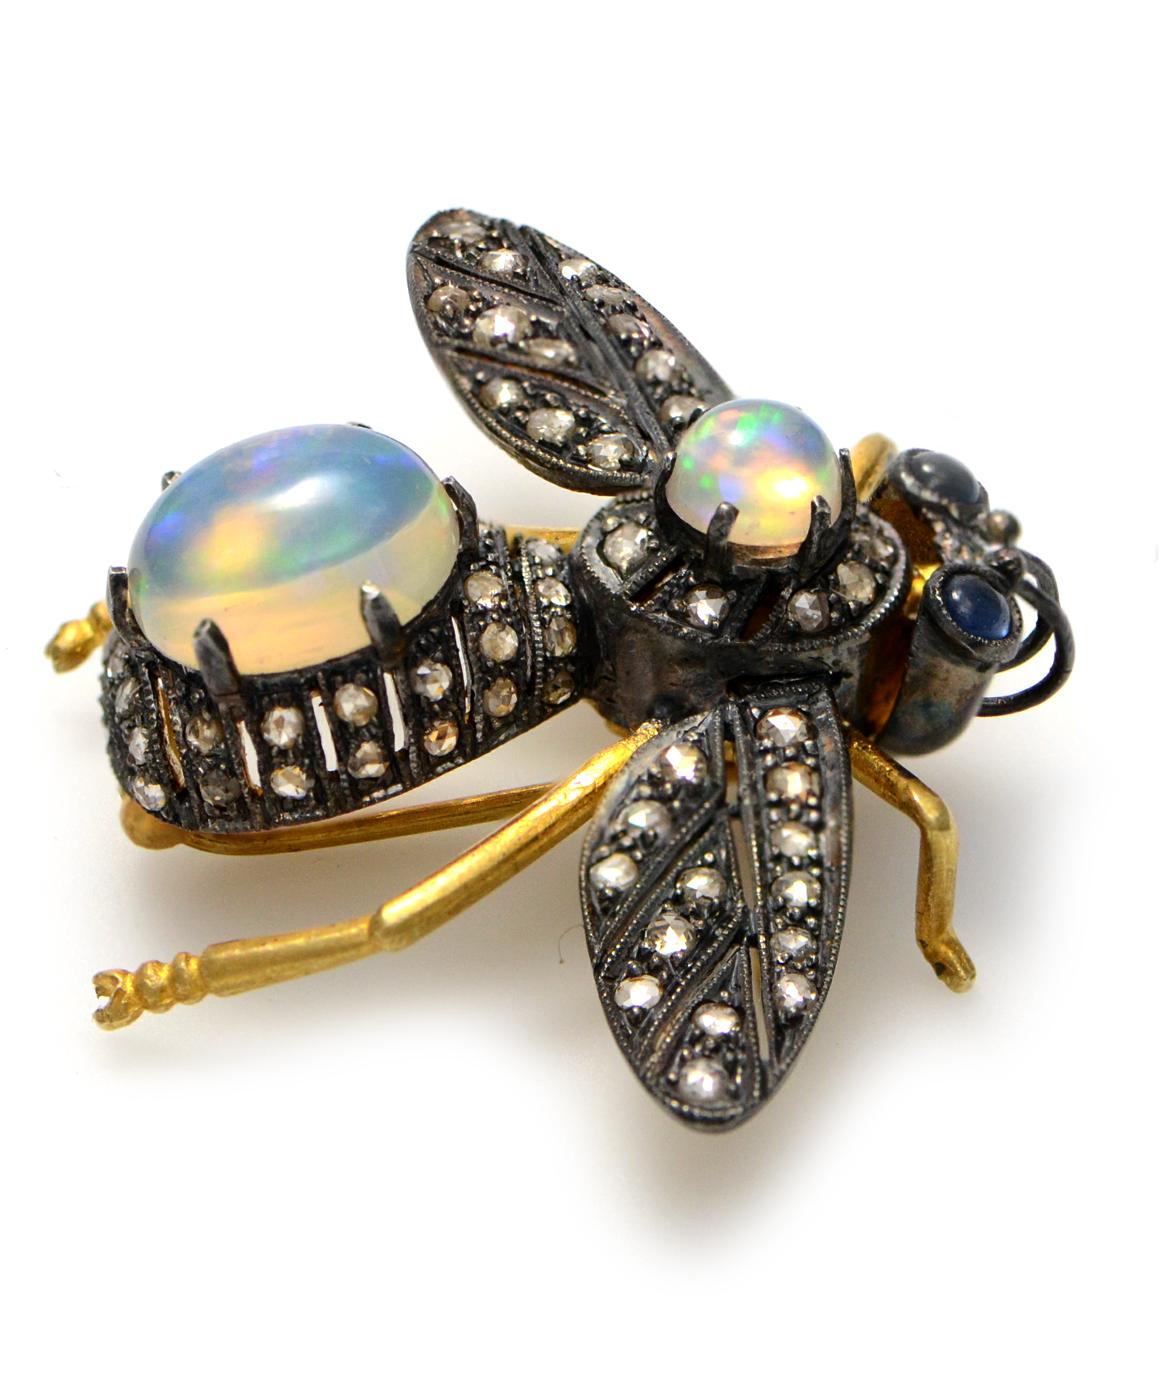 Solid 18K Yellow Gold & 925 Diamond, Opal & Sapphire Bee Pin/Pendant  6.8g 
Excellent condition! This bee pin composed of solid 18k yellow gold and sterling silver features wings that can move. The bees body features two genuine opals that measure